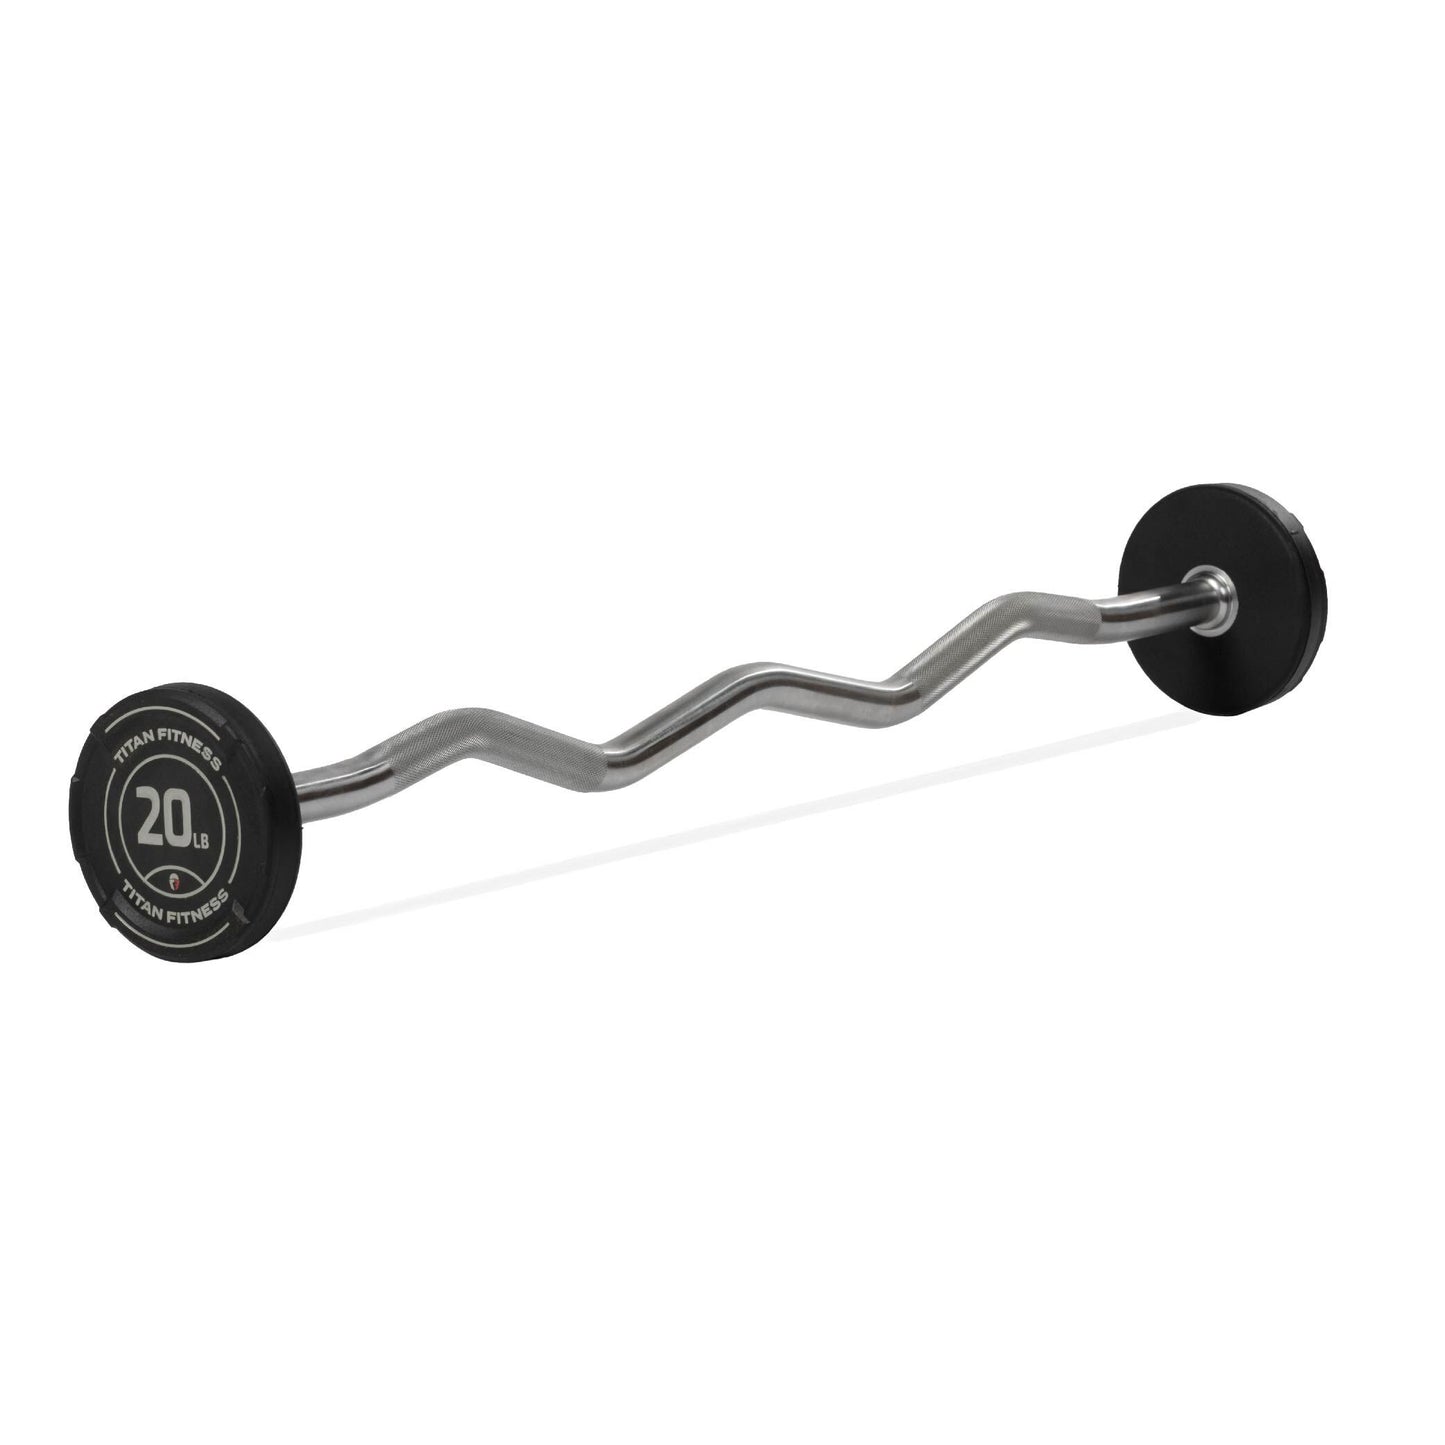 20 LB EZ Curl Fixed Rubber Barbell - view 1